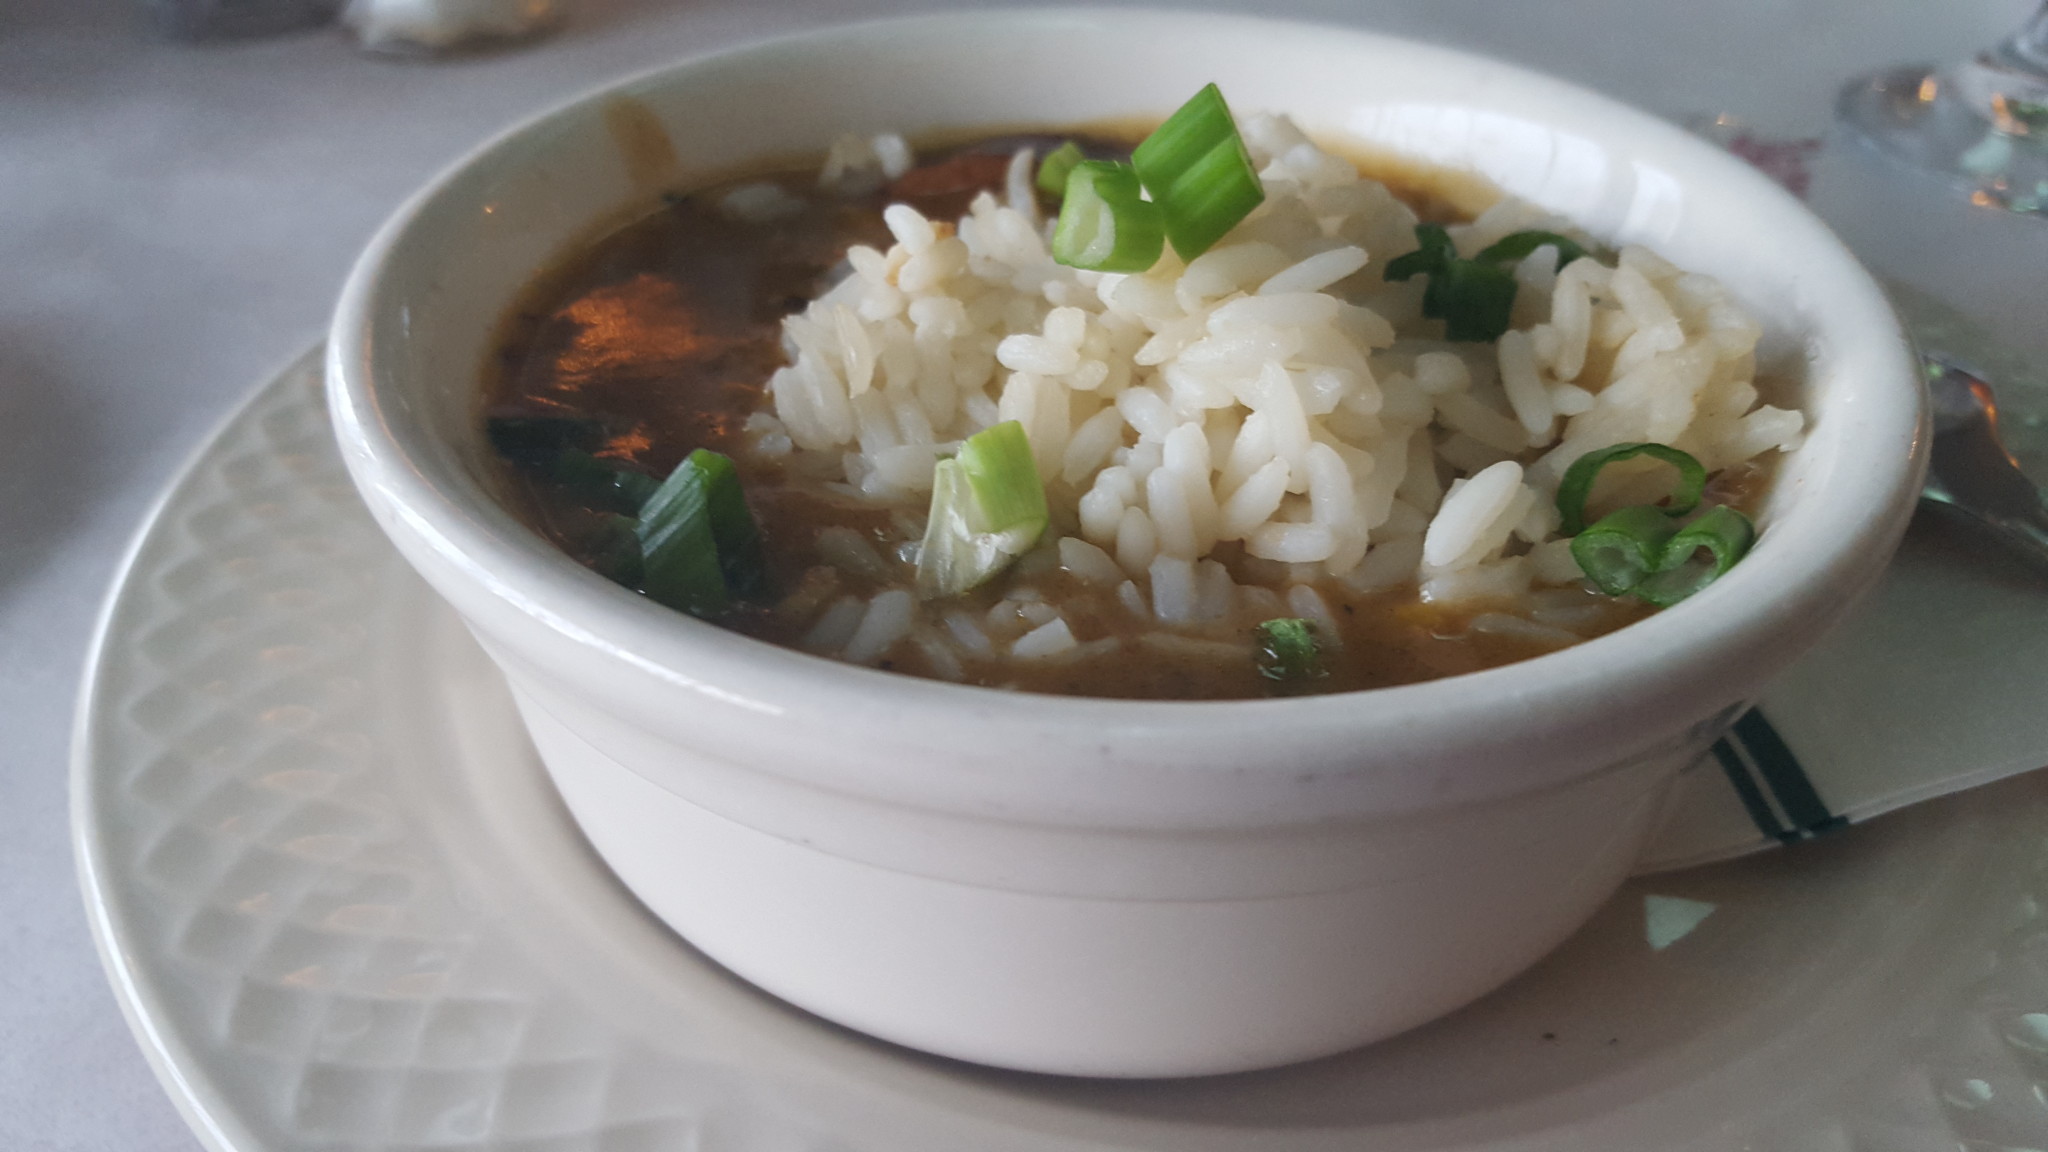 River City Brewing Company - Gumbo